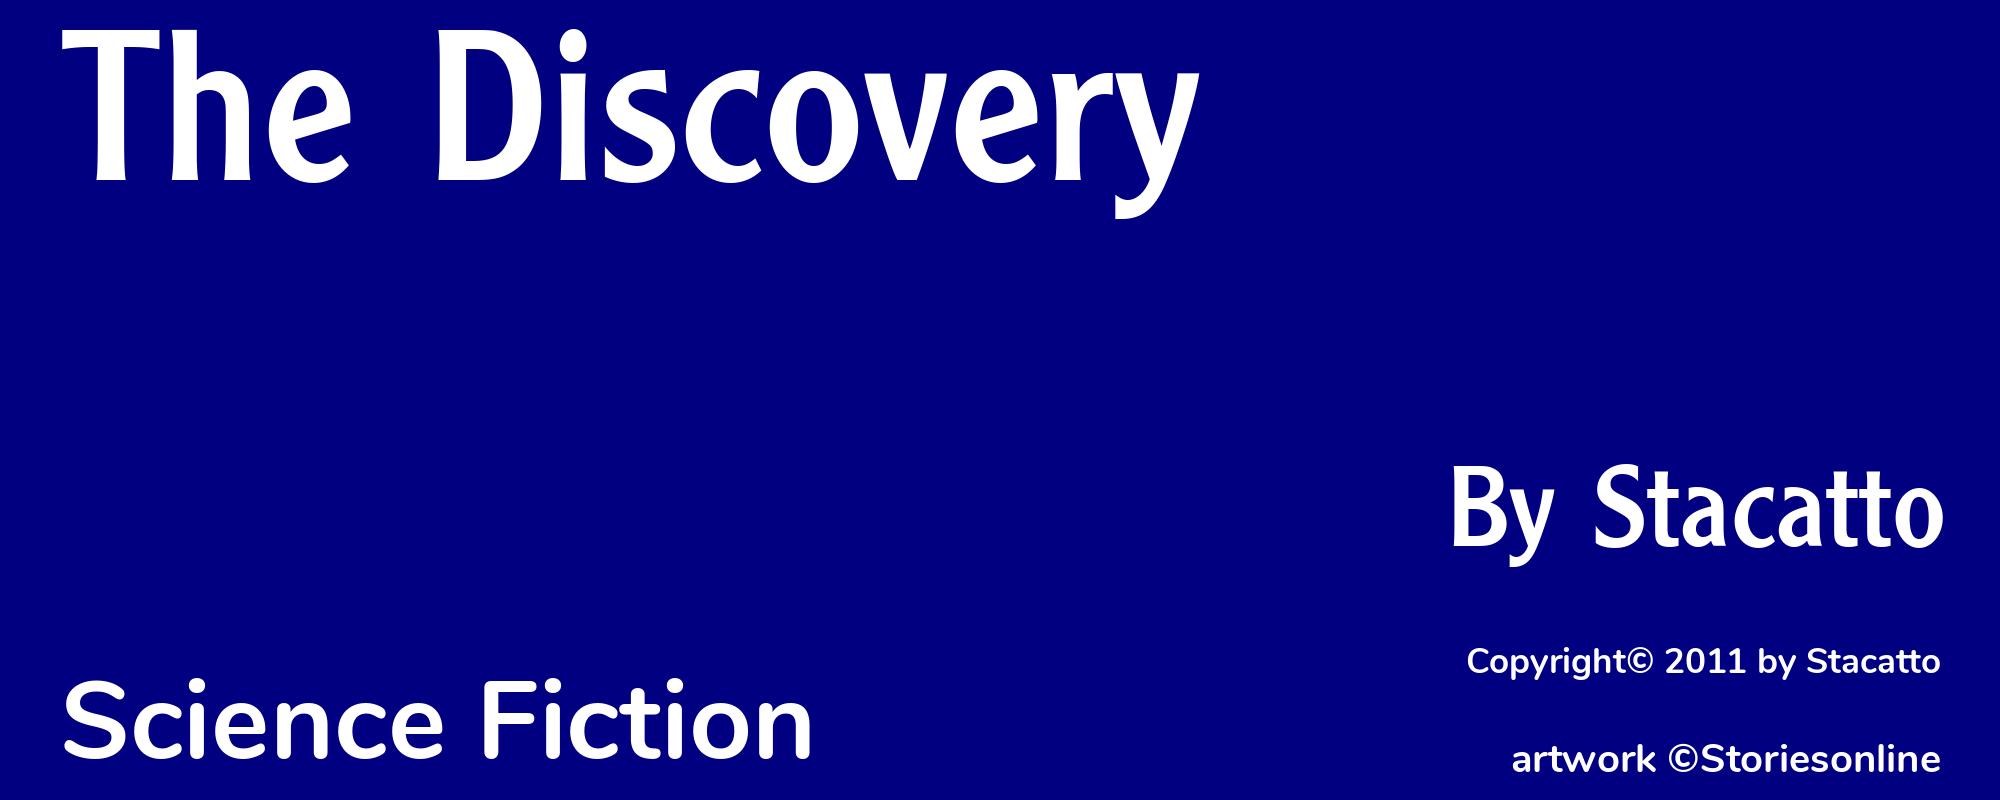 The Discovery - Cover